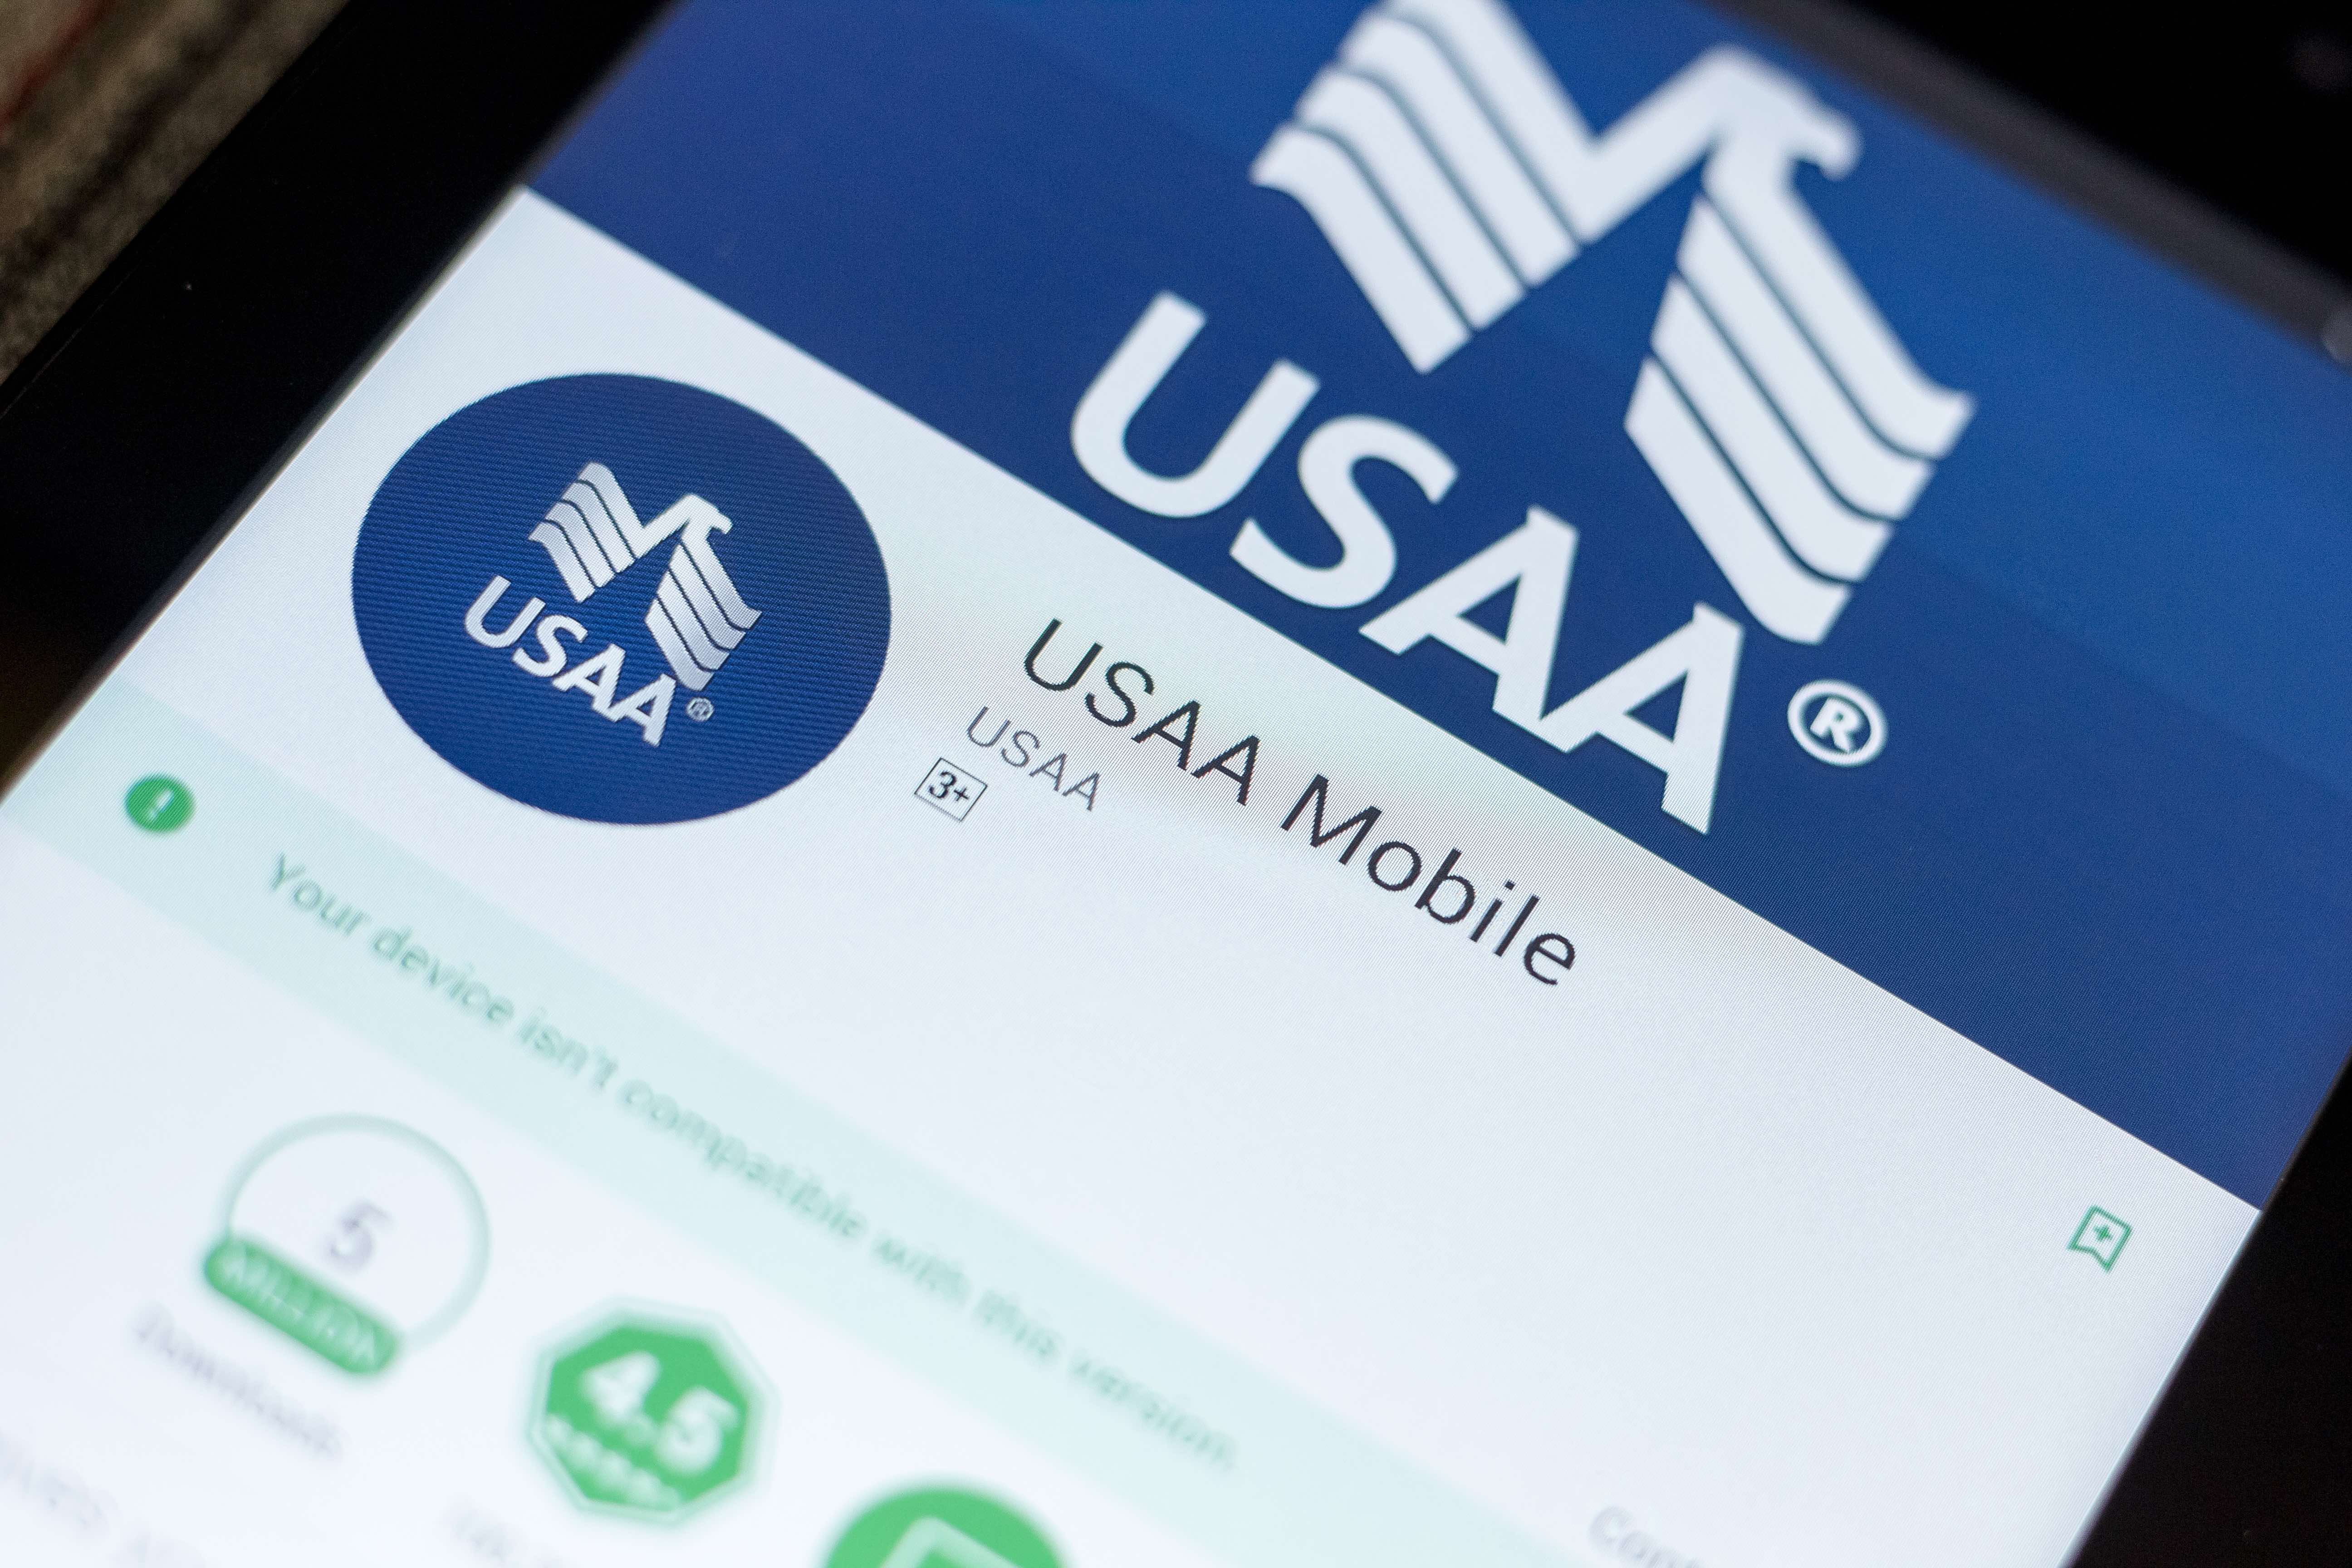 State Farm, USAA To Pay Each Other Insurance Claims On Blockchain By 2020